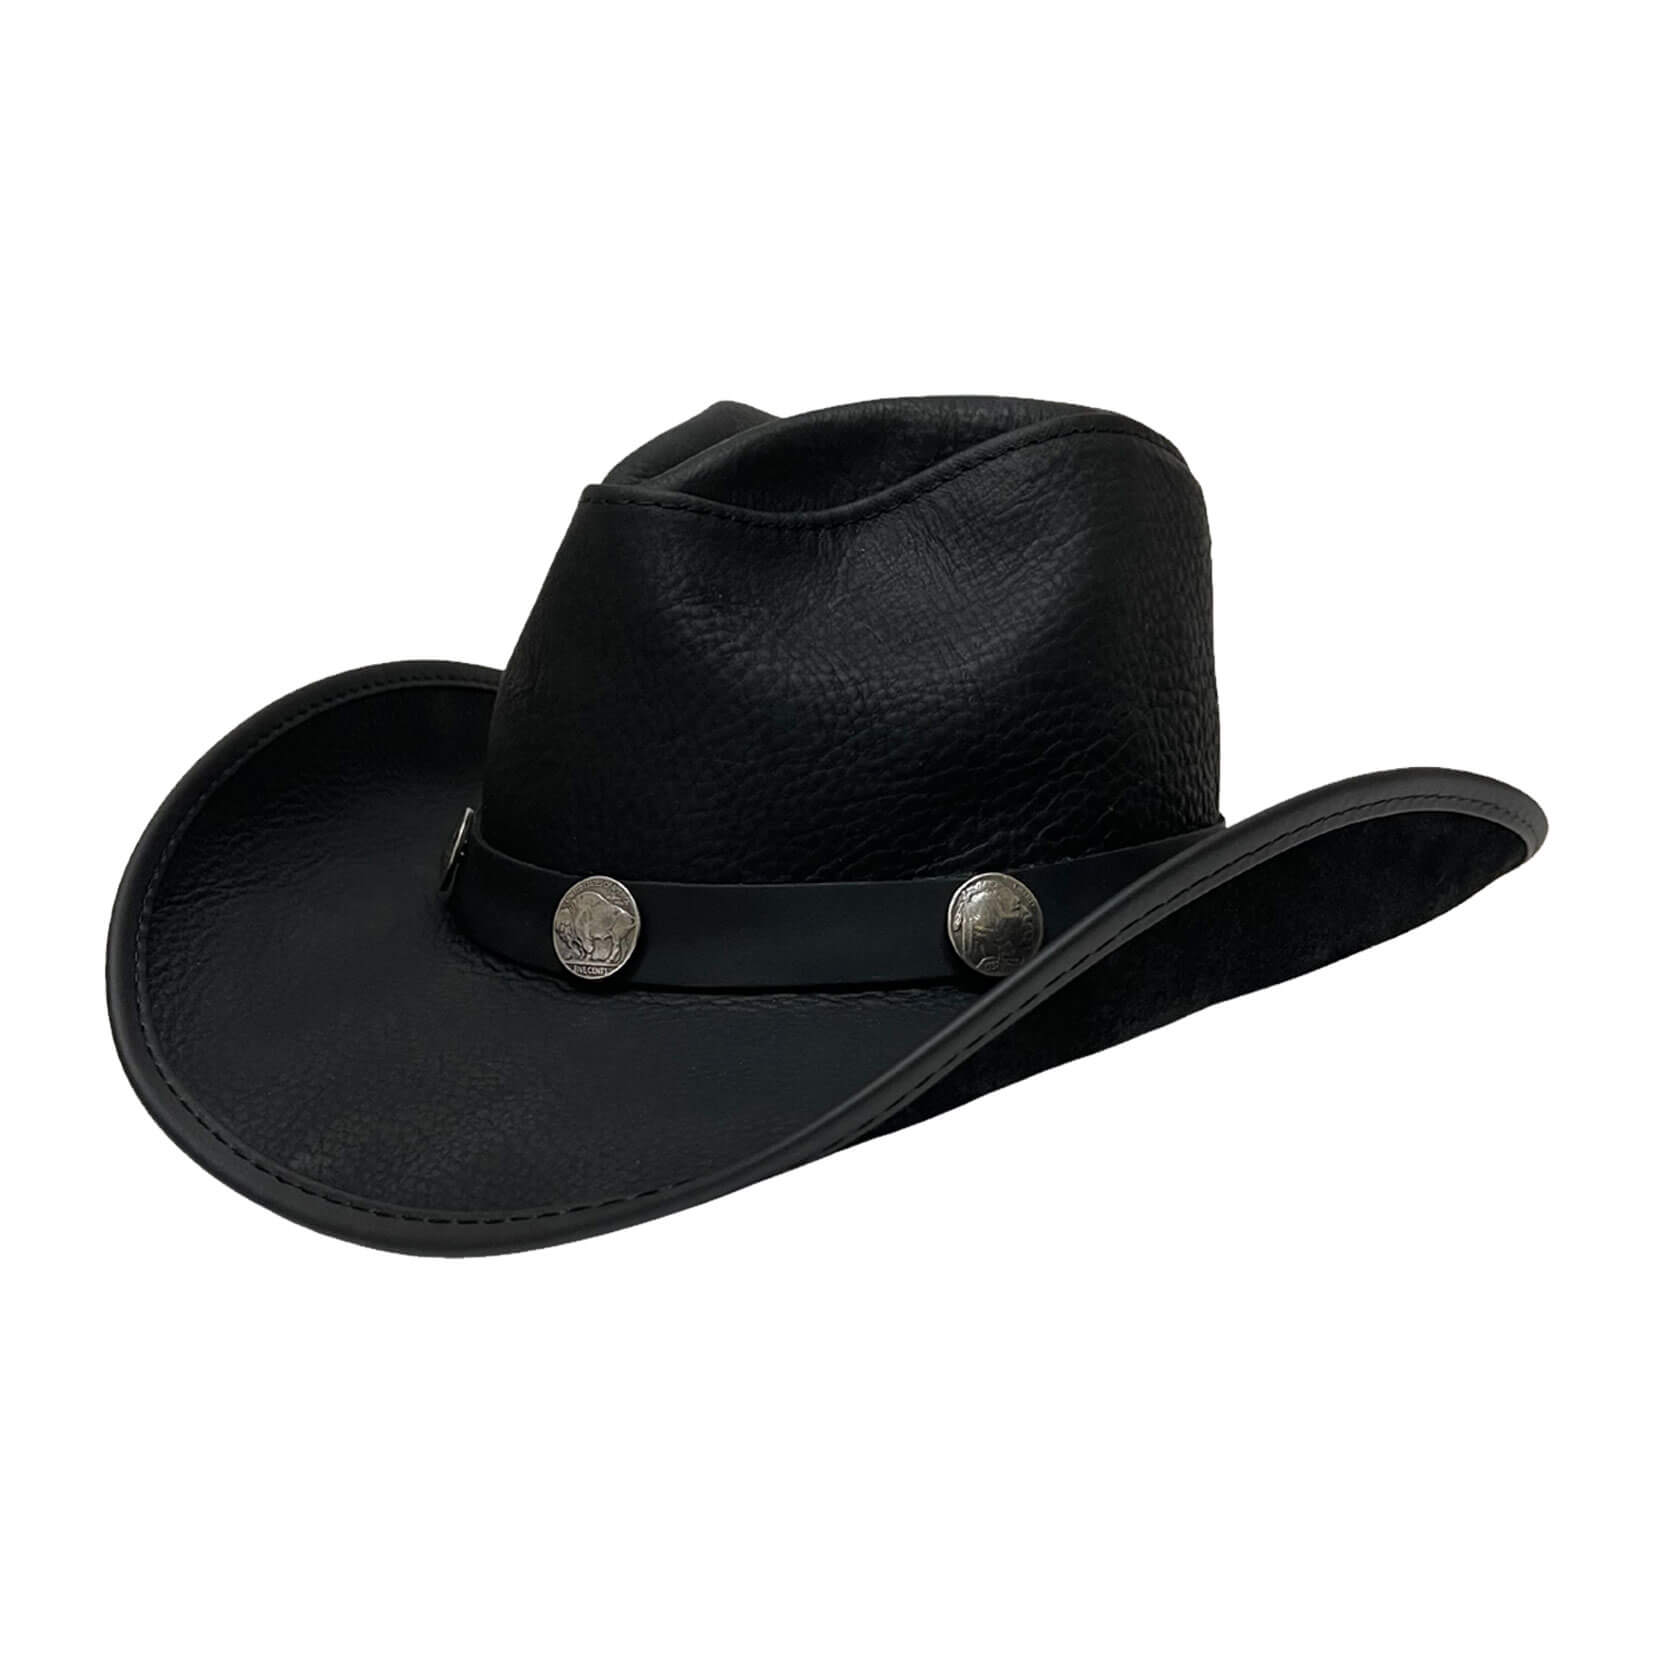 Leather Cowboy Hat - Limited Edition